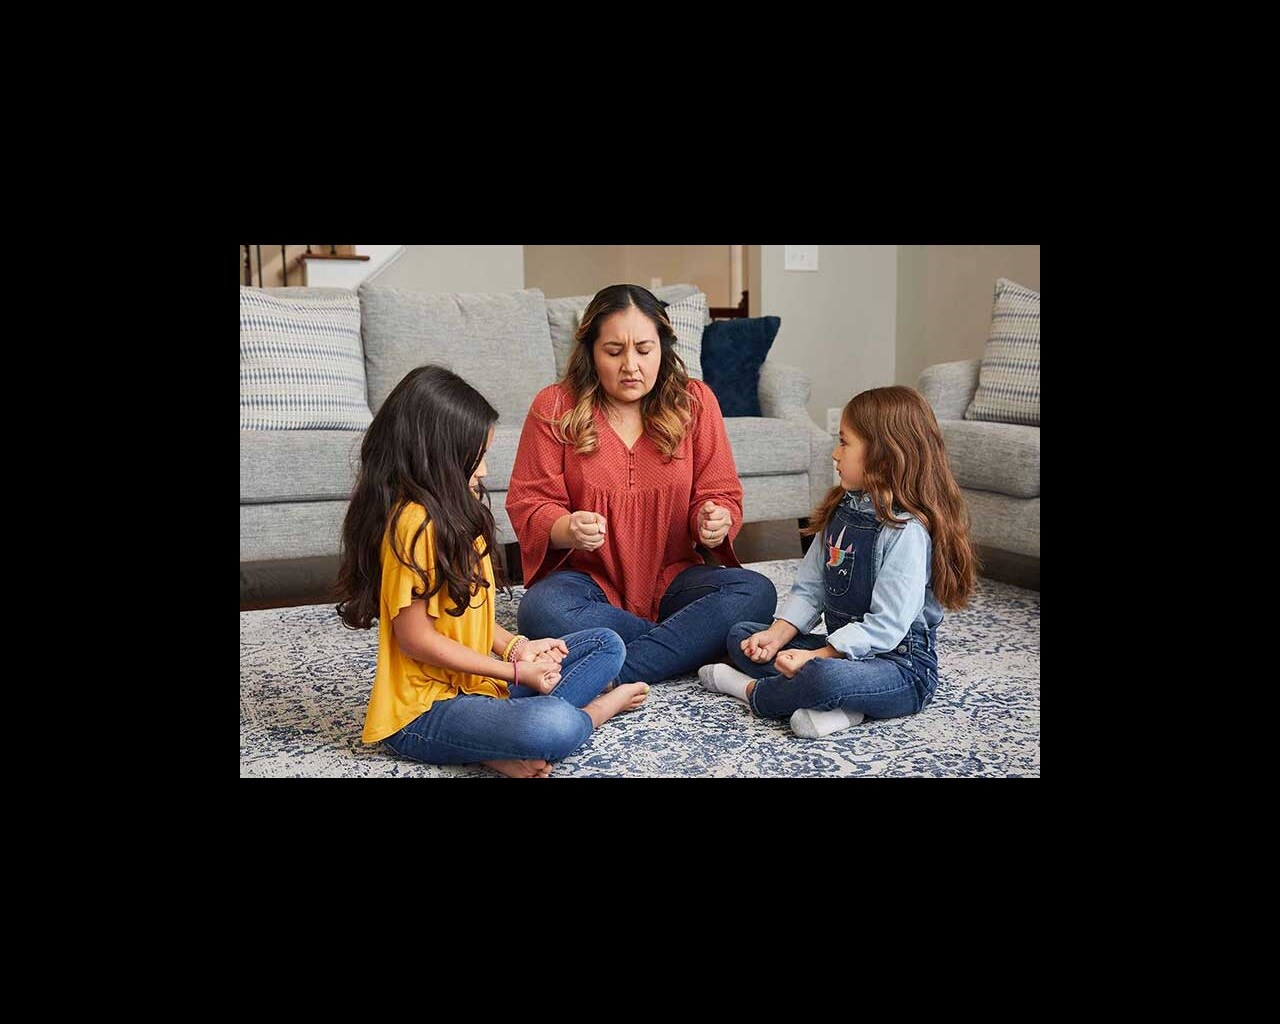 Parent practicing mindfulness exercises with children